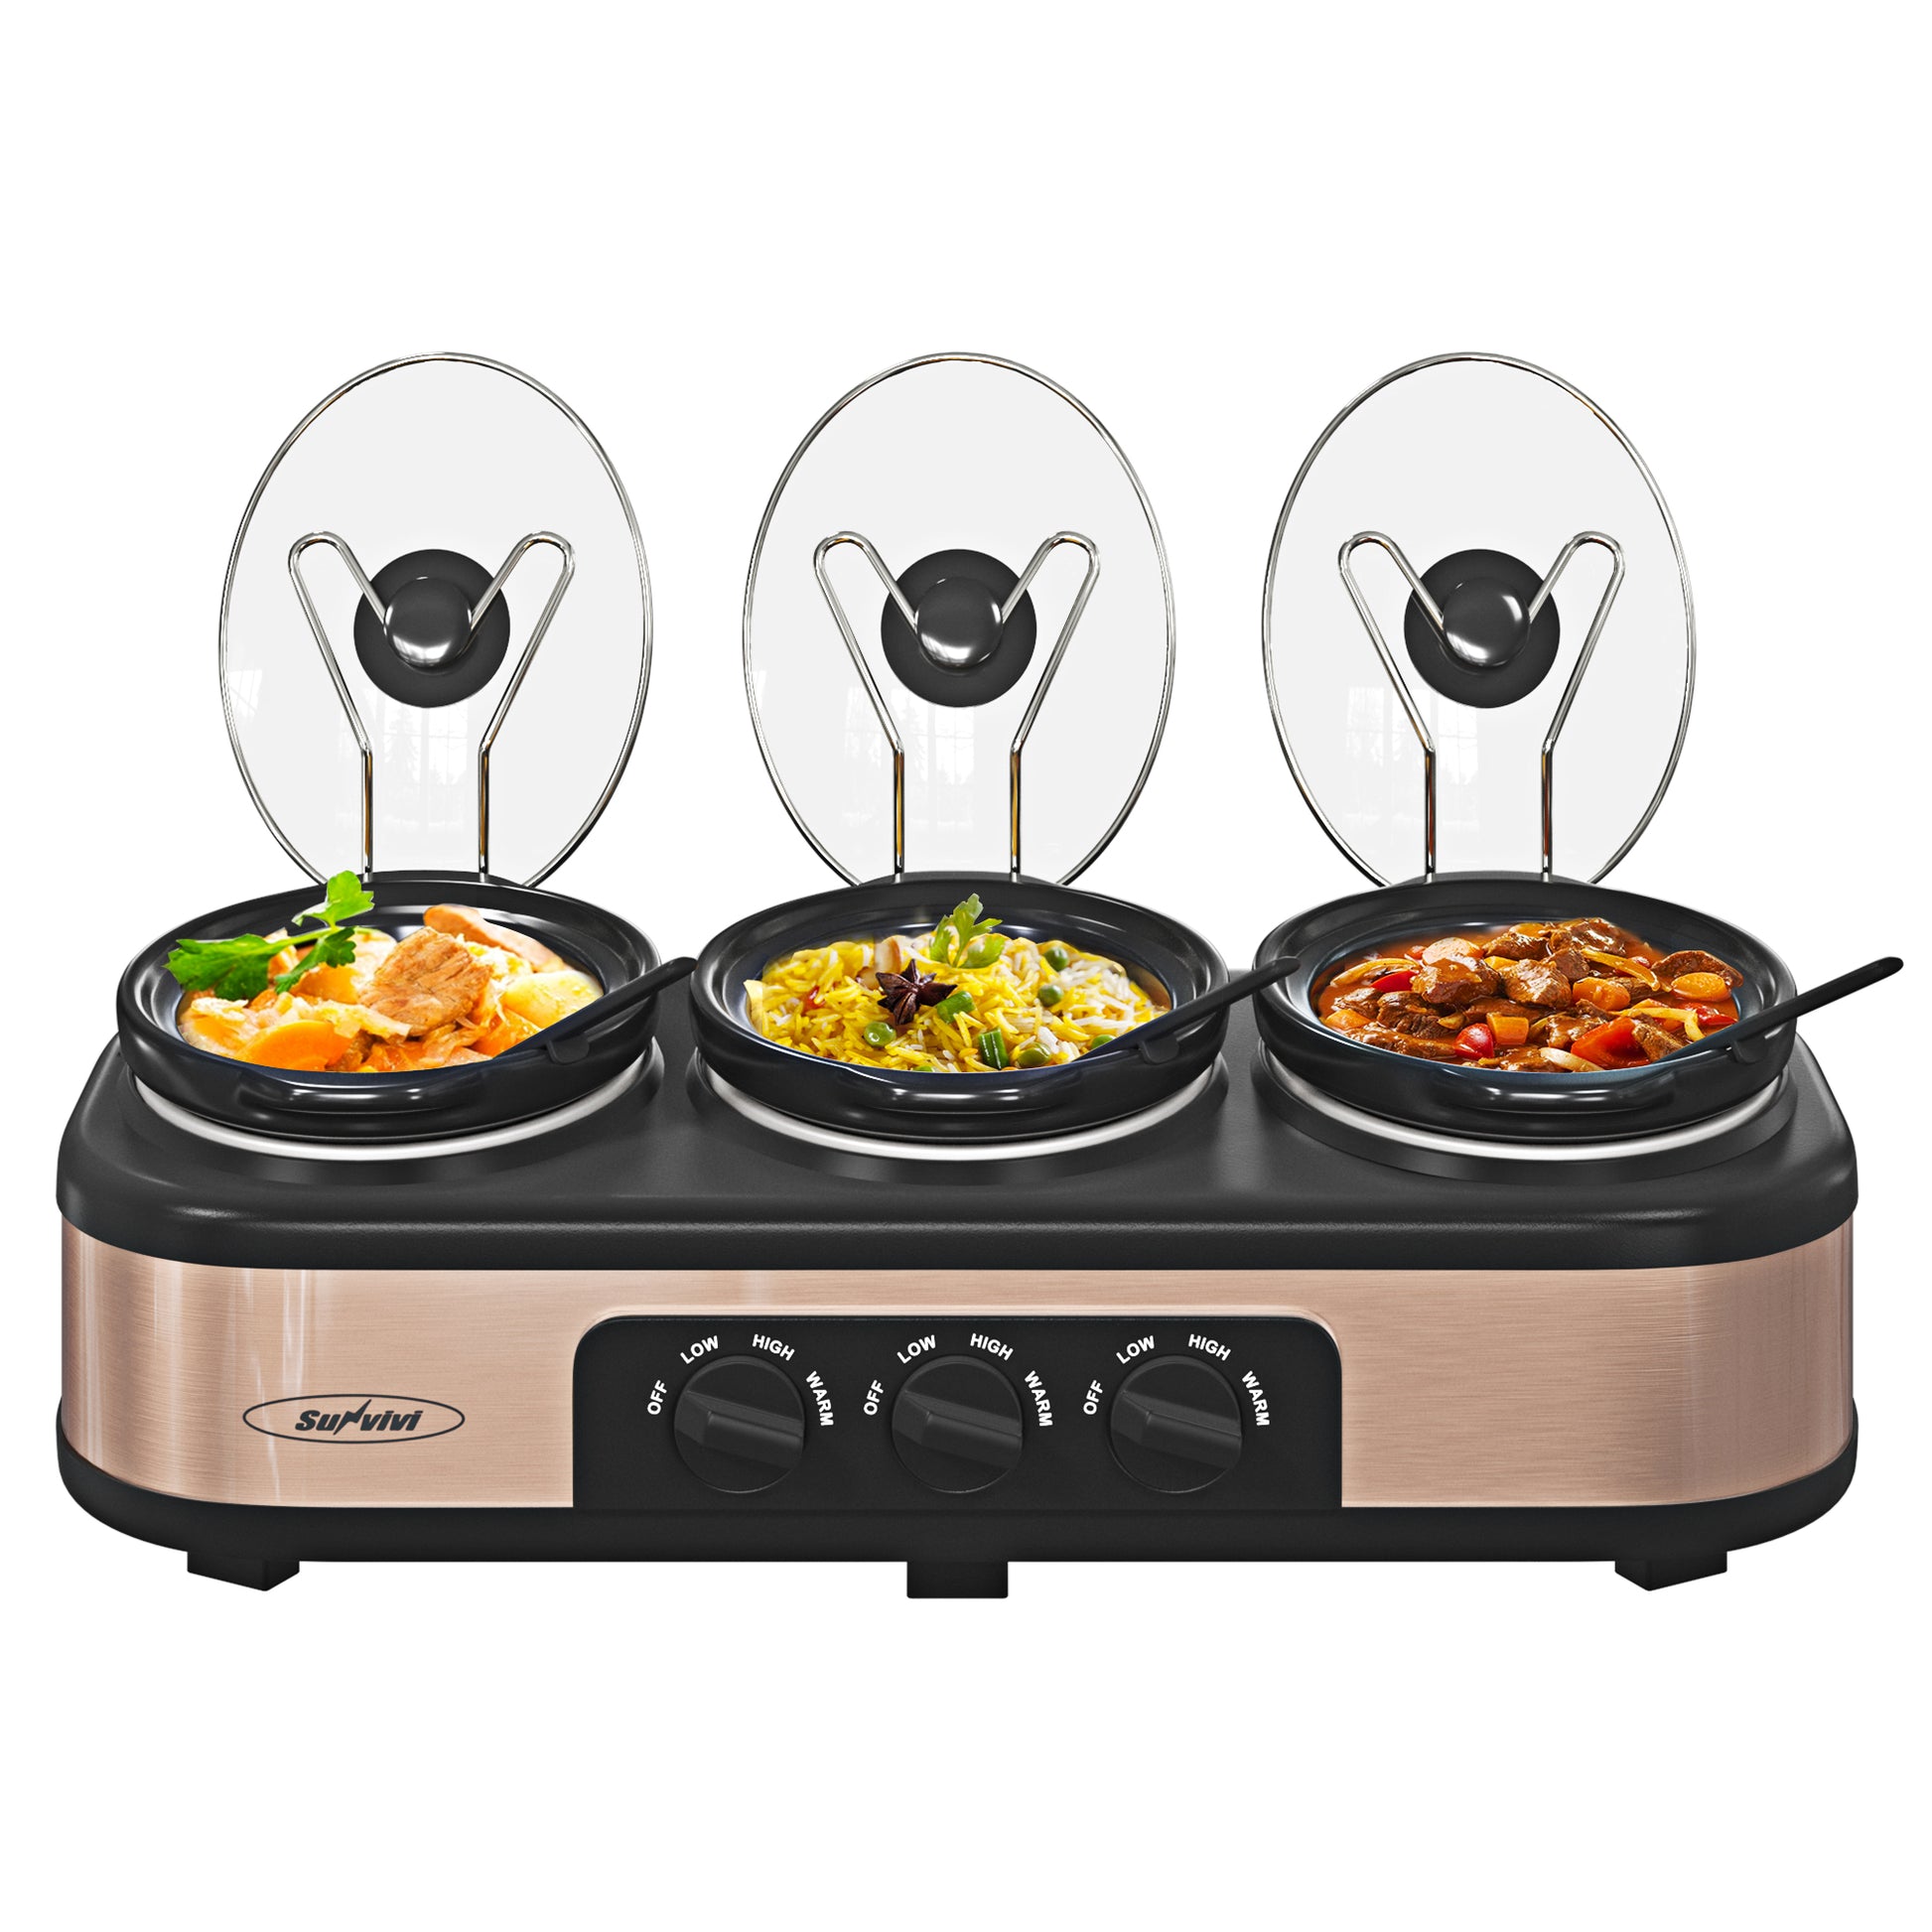  Sunvivi Triple Slow Cooker Buffet Servers and Warmer,3 Pot Food  Small Mini Manual Slow Cooker with Adjustable Temp Stainless Steel Lid  Rests,Removable Ceramic Pot,4.5 QT Red: Home & Kitchen